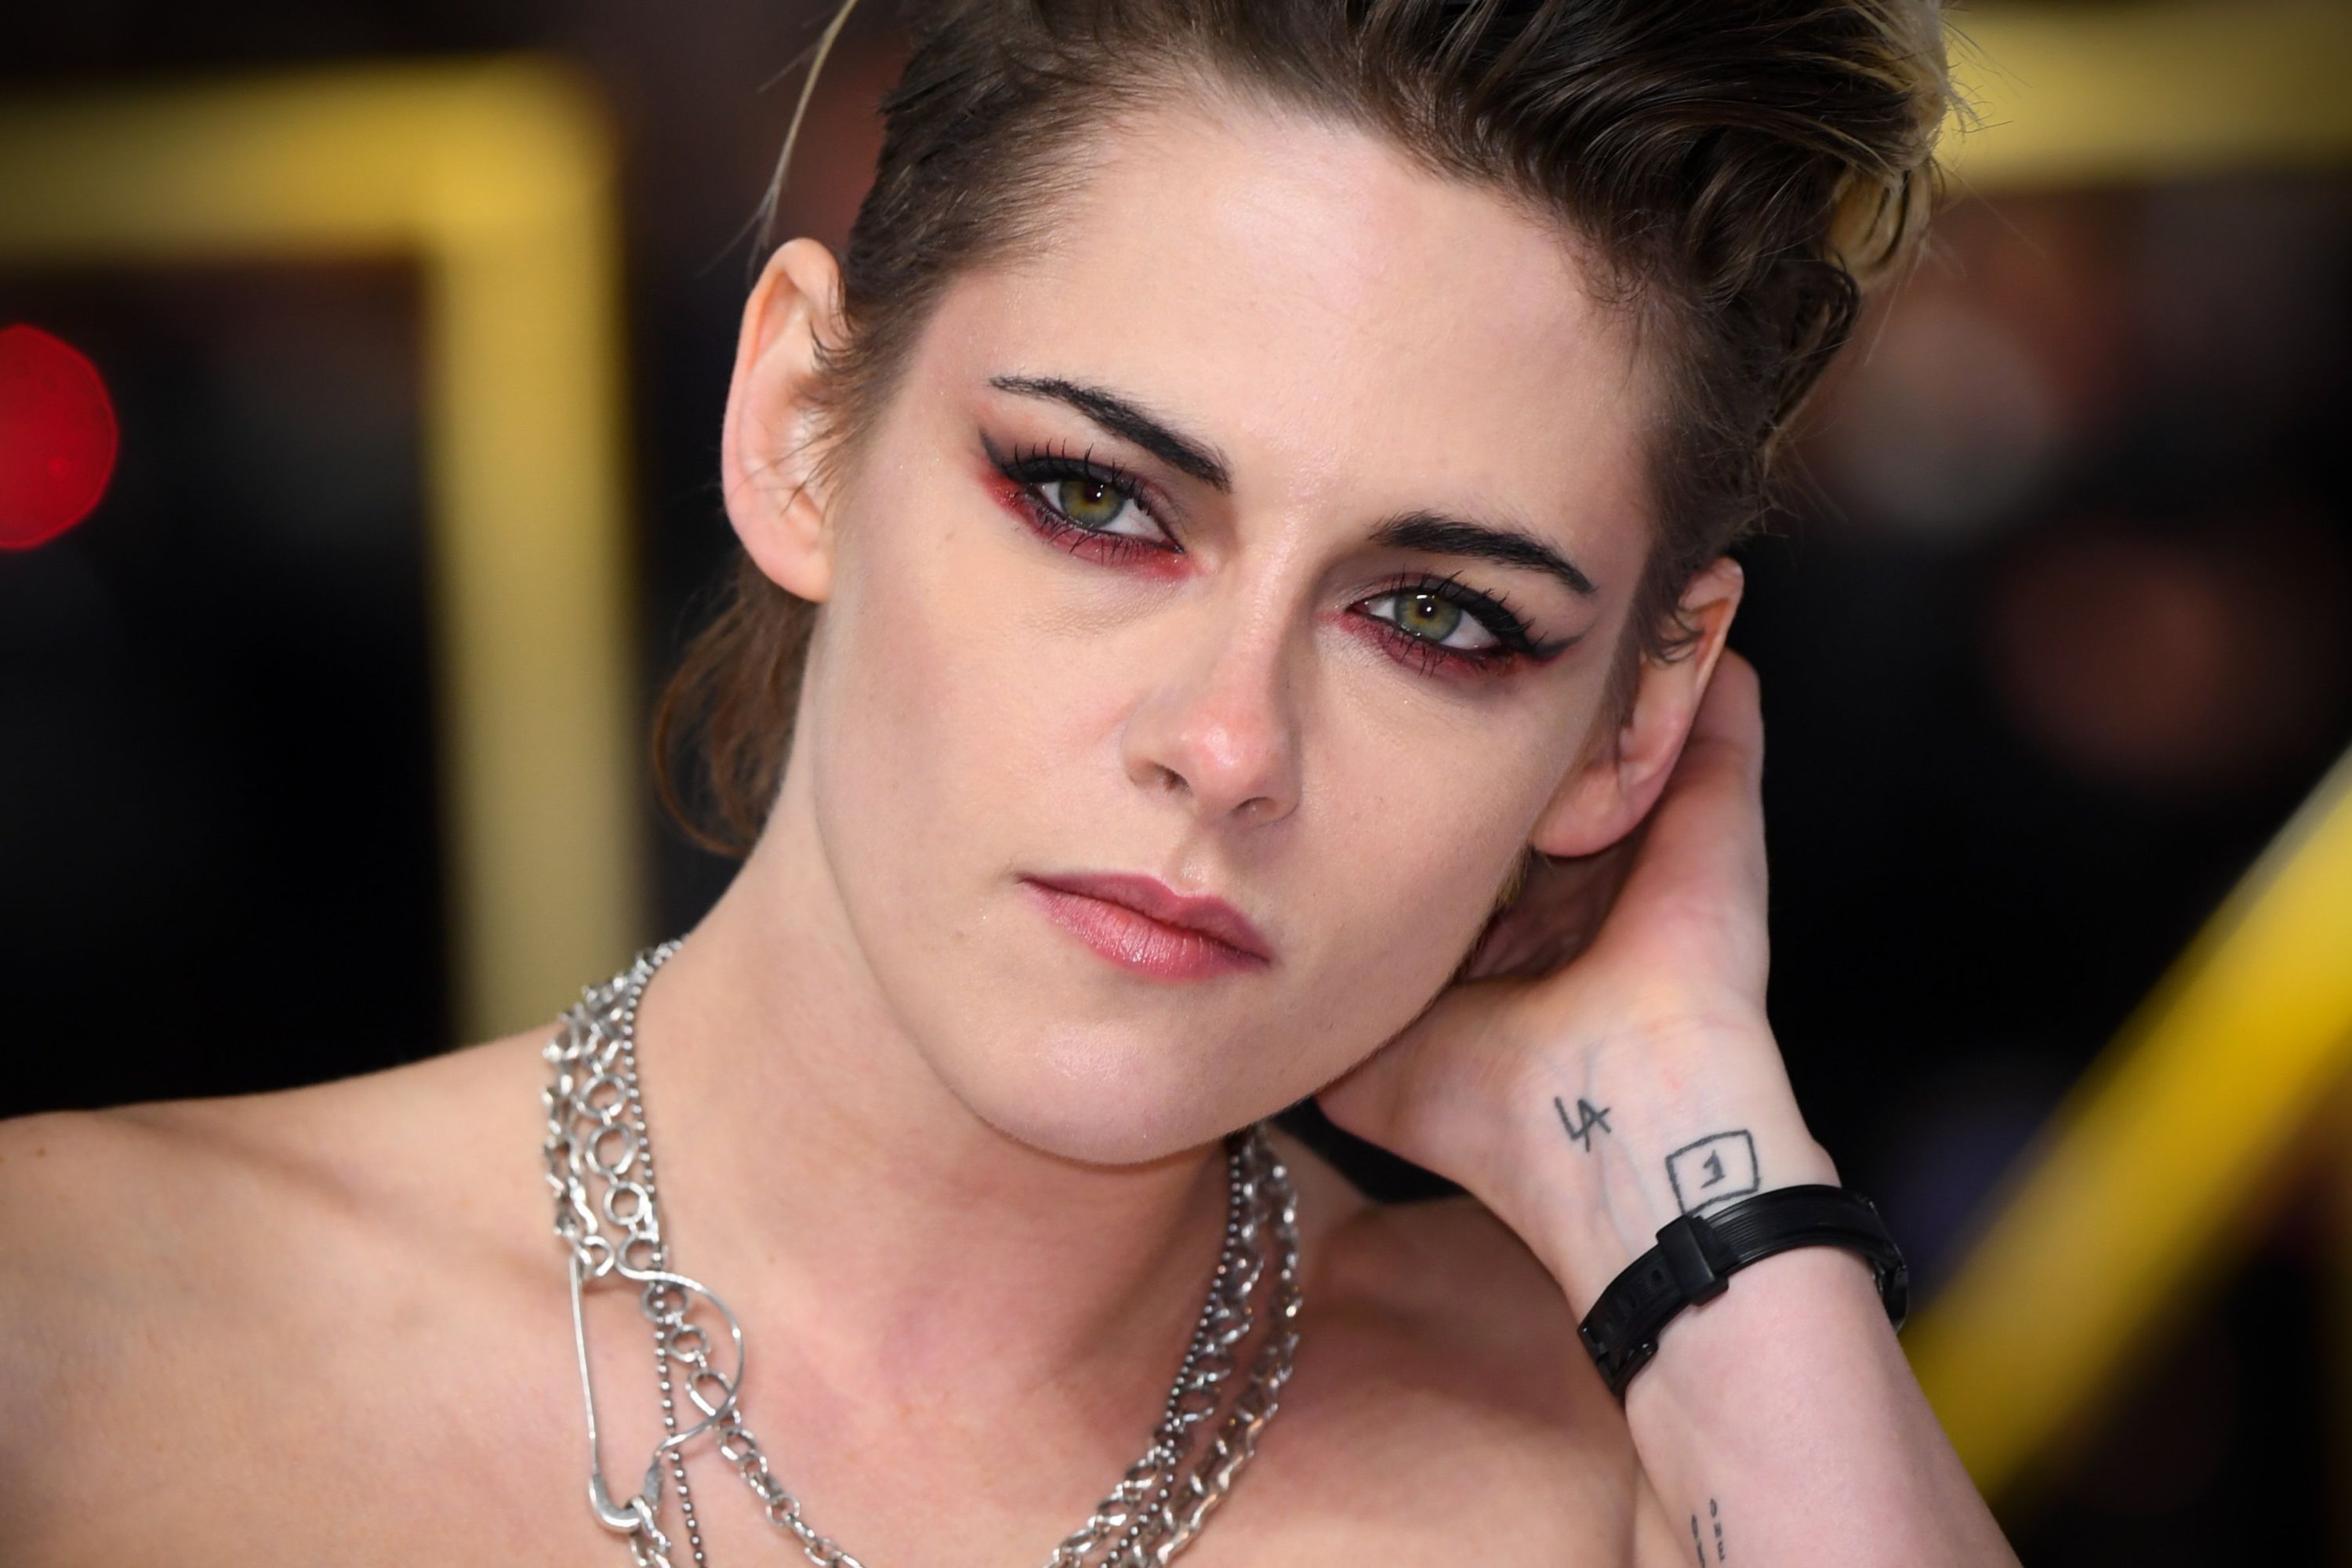 PAPERS.co | Android wallpaper | hk86-kristen-stewart-film-actress-girl